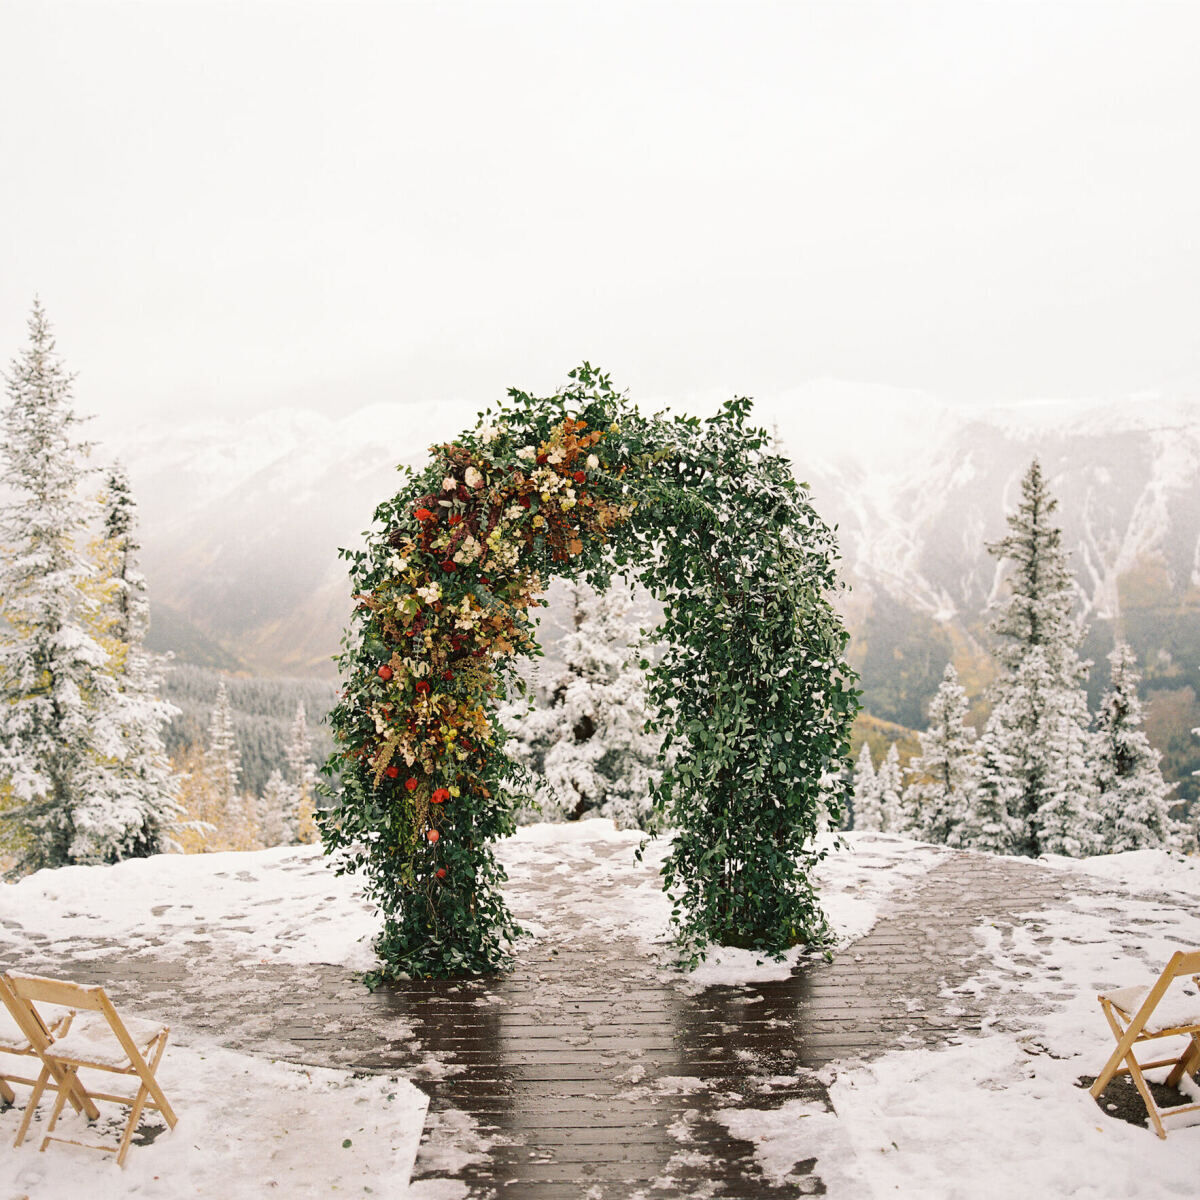 Holiday Wedding: An outdoor snowy wedding ceremony set-up with pine trees in the background. There's a wedding arch adorned with greenery and red florals.